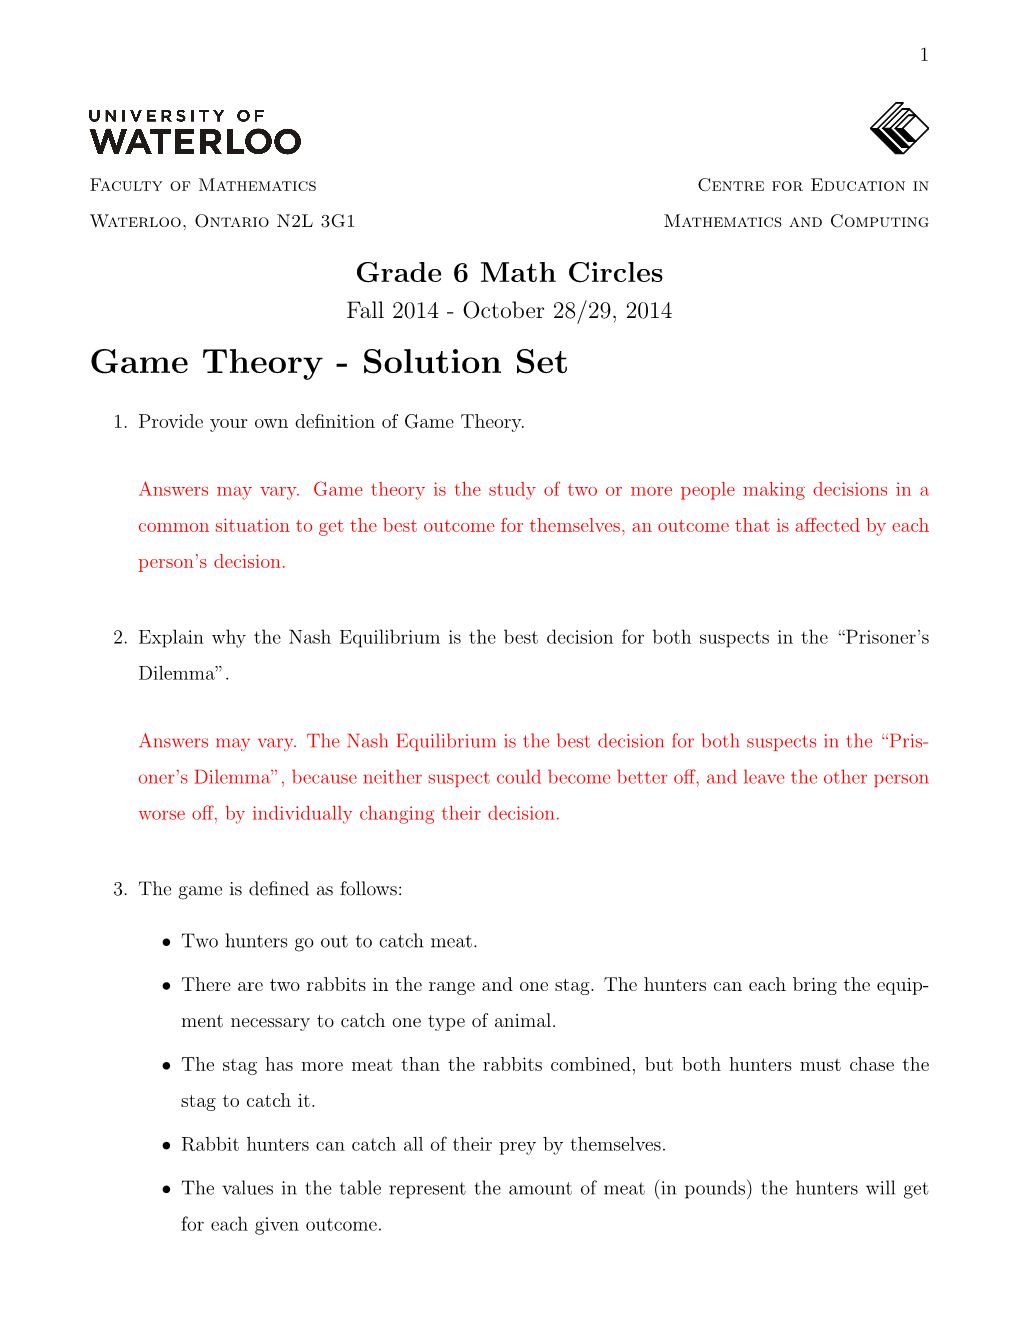 Game Theory - Solution Set